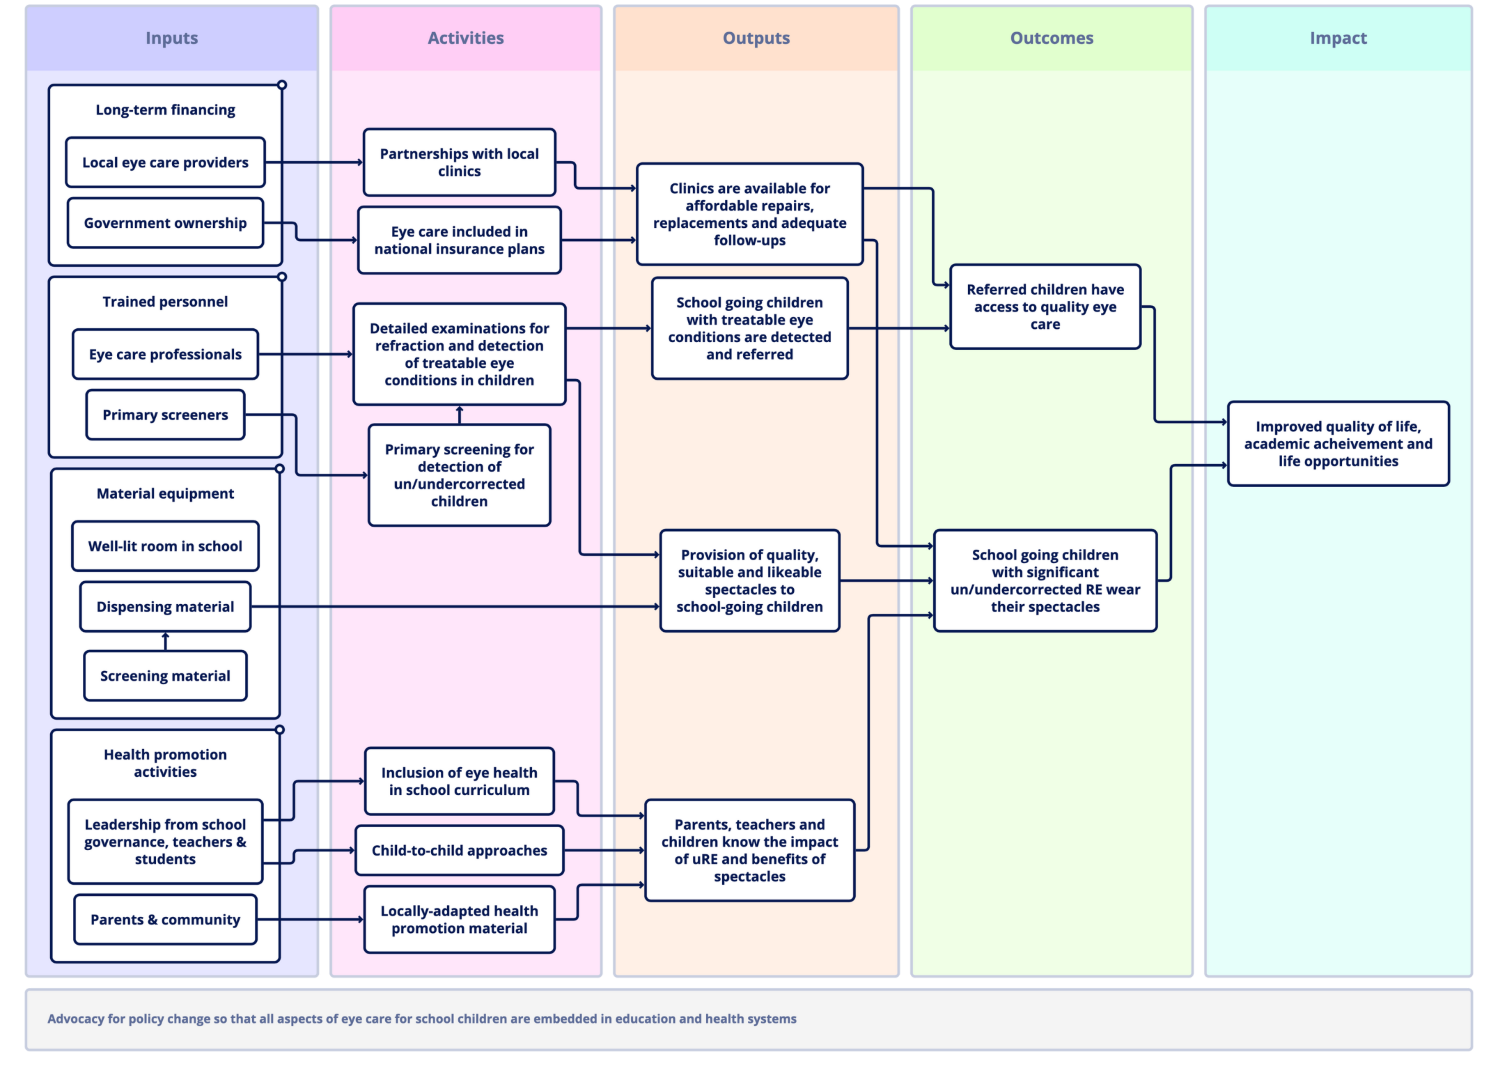 A detailed flowchart outlining the pathway from inputs to impact in a school eye health program. Inputs include financing, local eye care providers, government ownership, trained personnel, material equipment, and health promotion activities. Activities involve partnerships, inclusion in insurance plans, detailed examinations, primary screening, and health promotion. Outputs include available clinics, detection of eye conditions, and provision of spectacles. Outcomes focus on access to quality eye care and children wearing their spectacles. The impact is improved quality of life, academic achievement, and life opportunities.